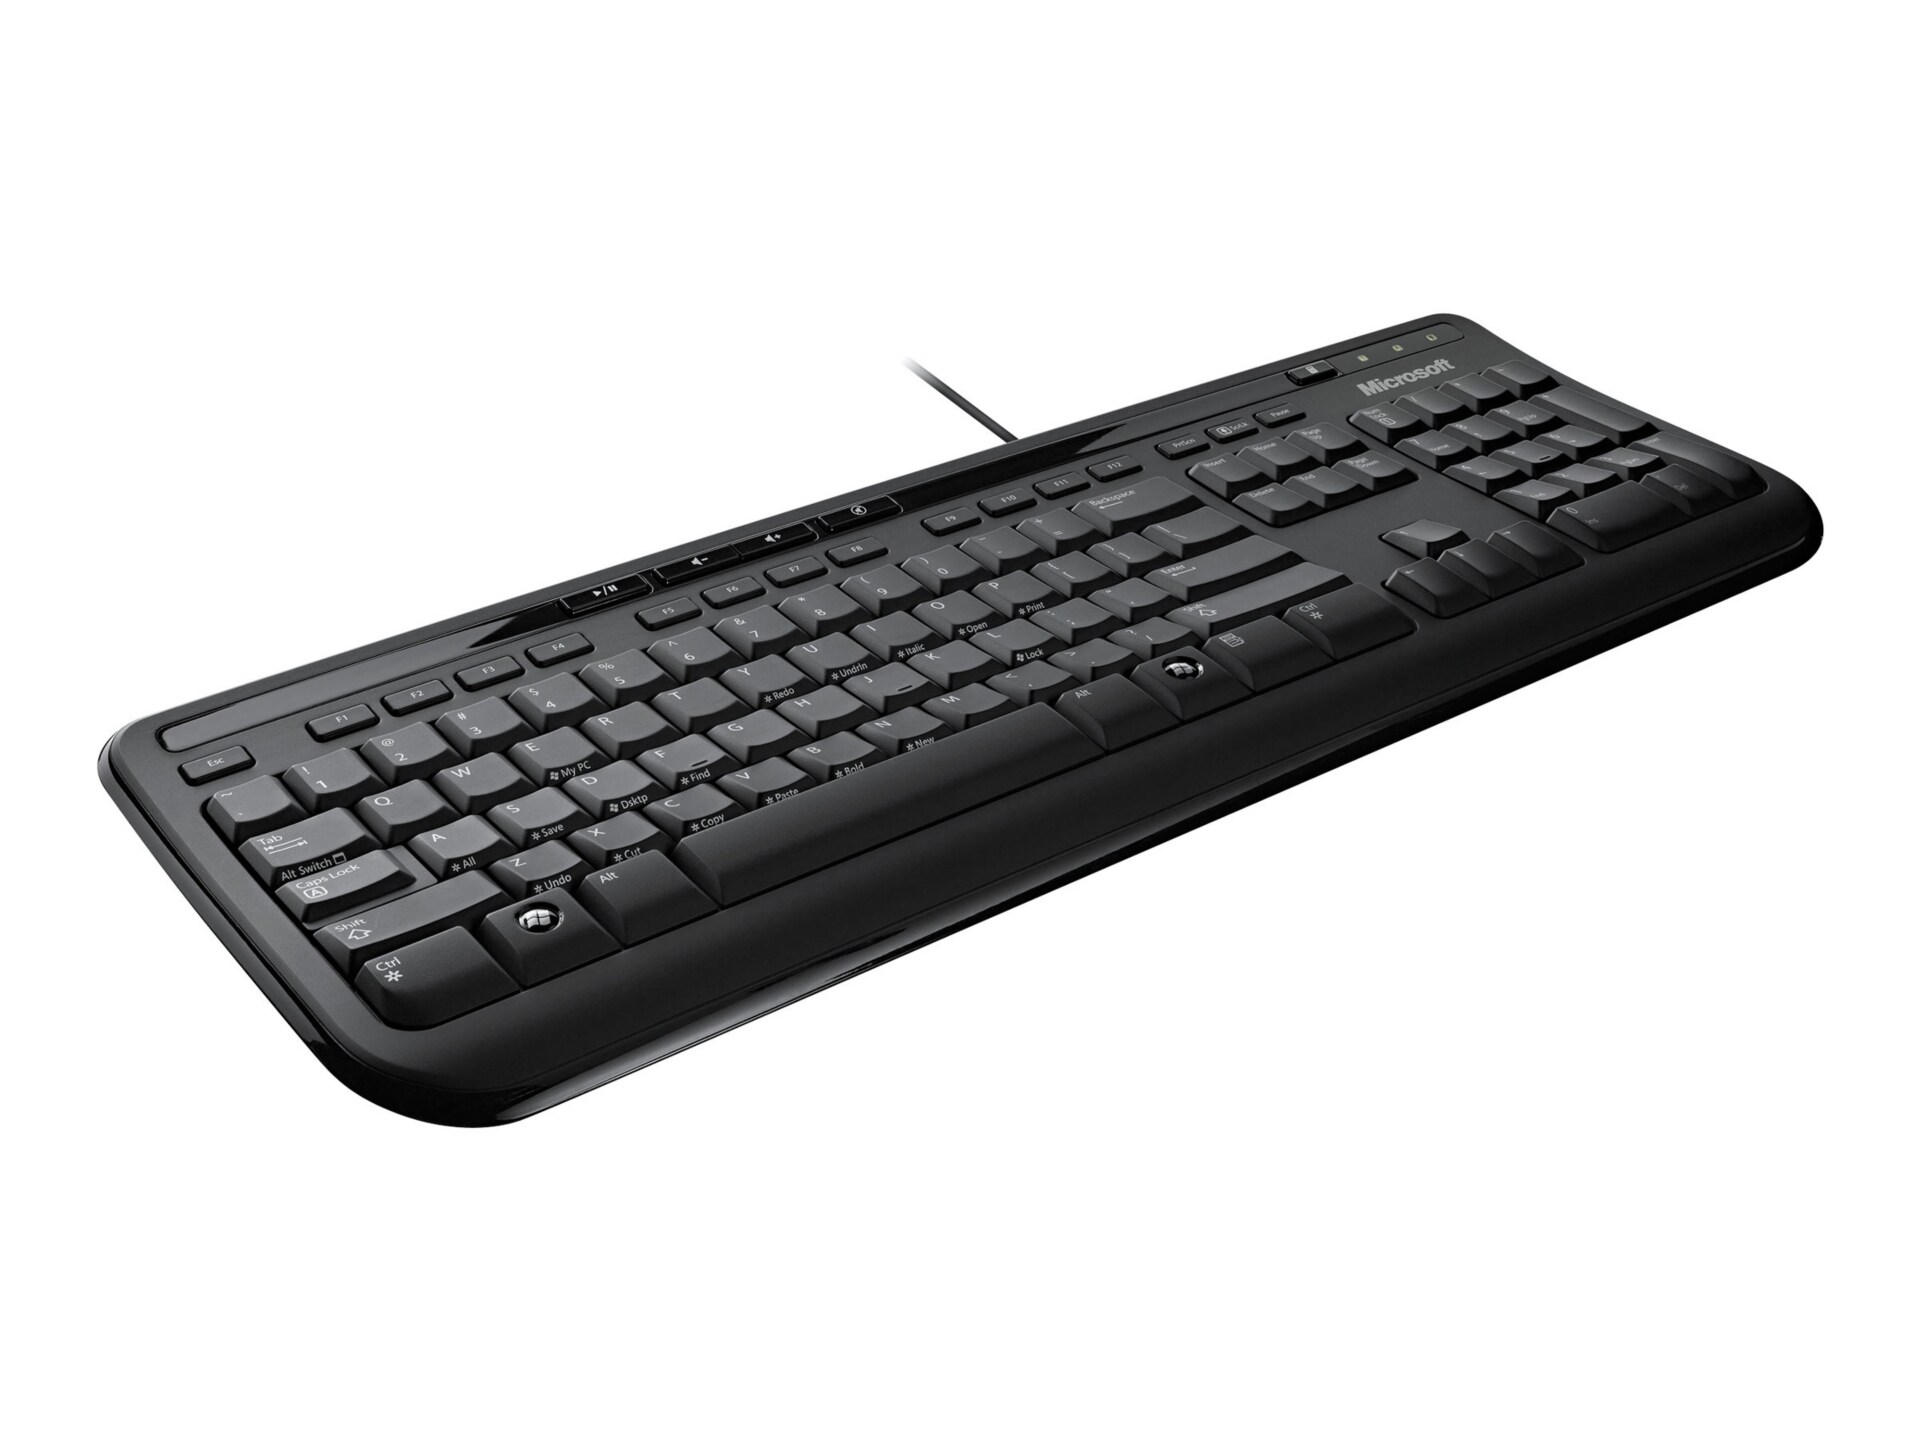 Microsoft Wired Keyboard 600 - clavier - Anglais canadien - noir